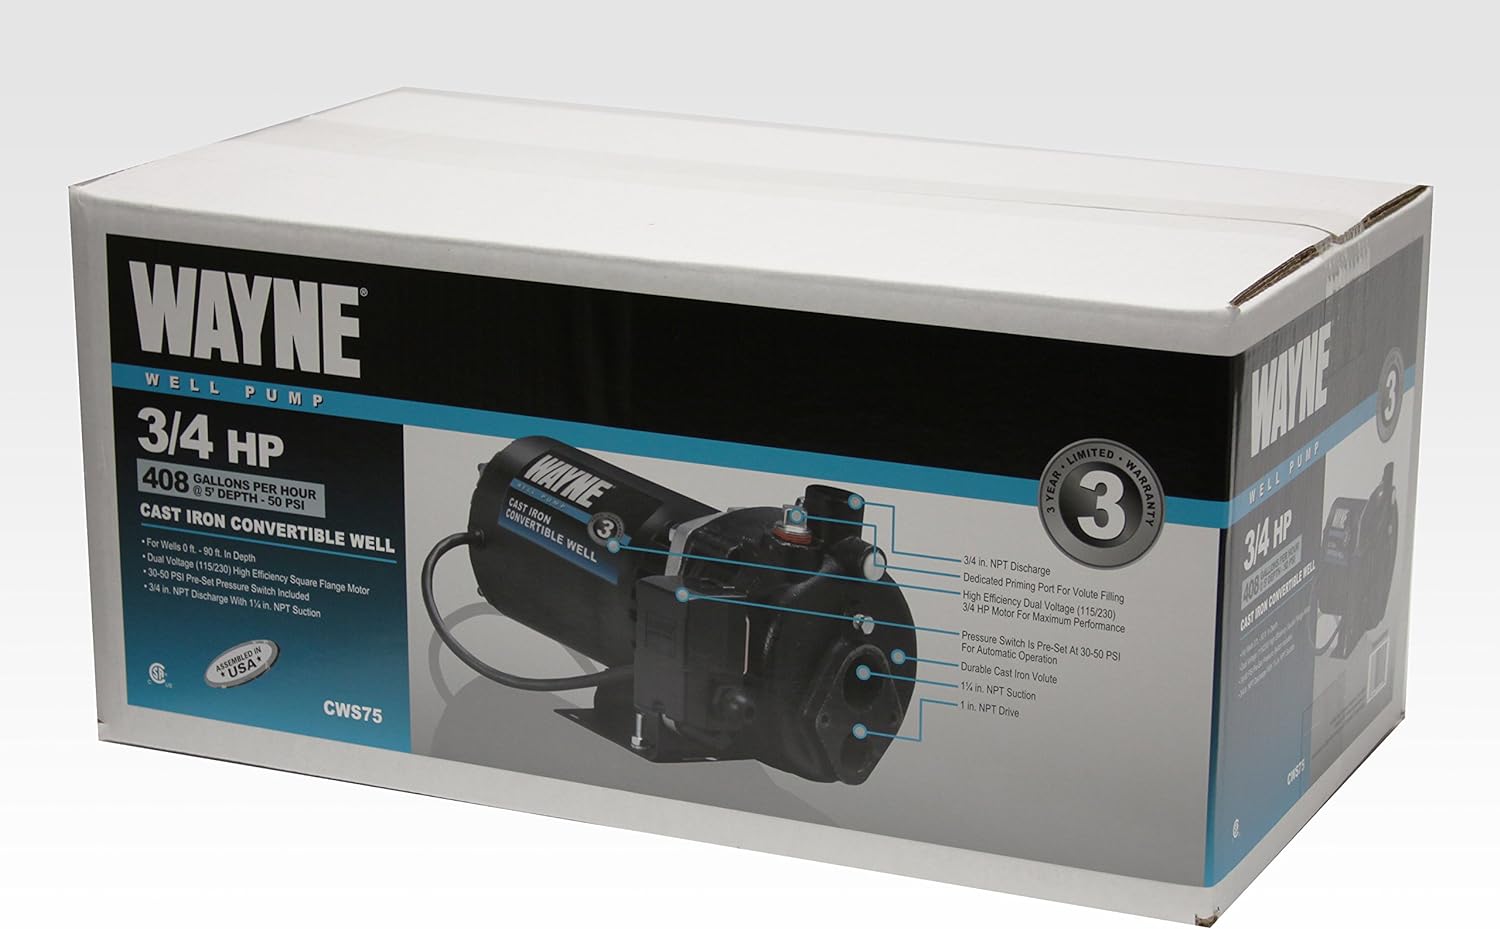 WAYNE CWS50-1/2 HP Cast Iron Convertible Jet Well Pump - Up to 408 Gallons Per Hour - Heavy Duty Jet Well Pump